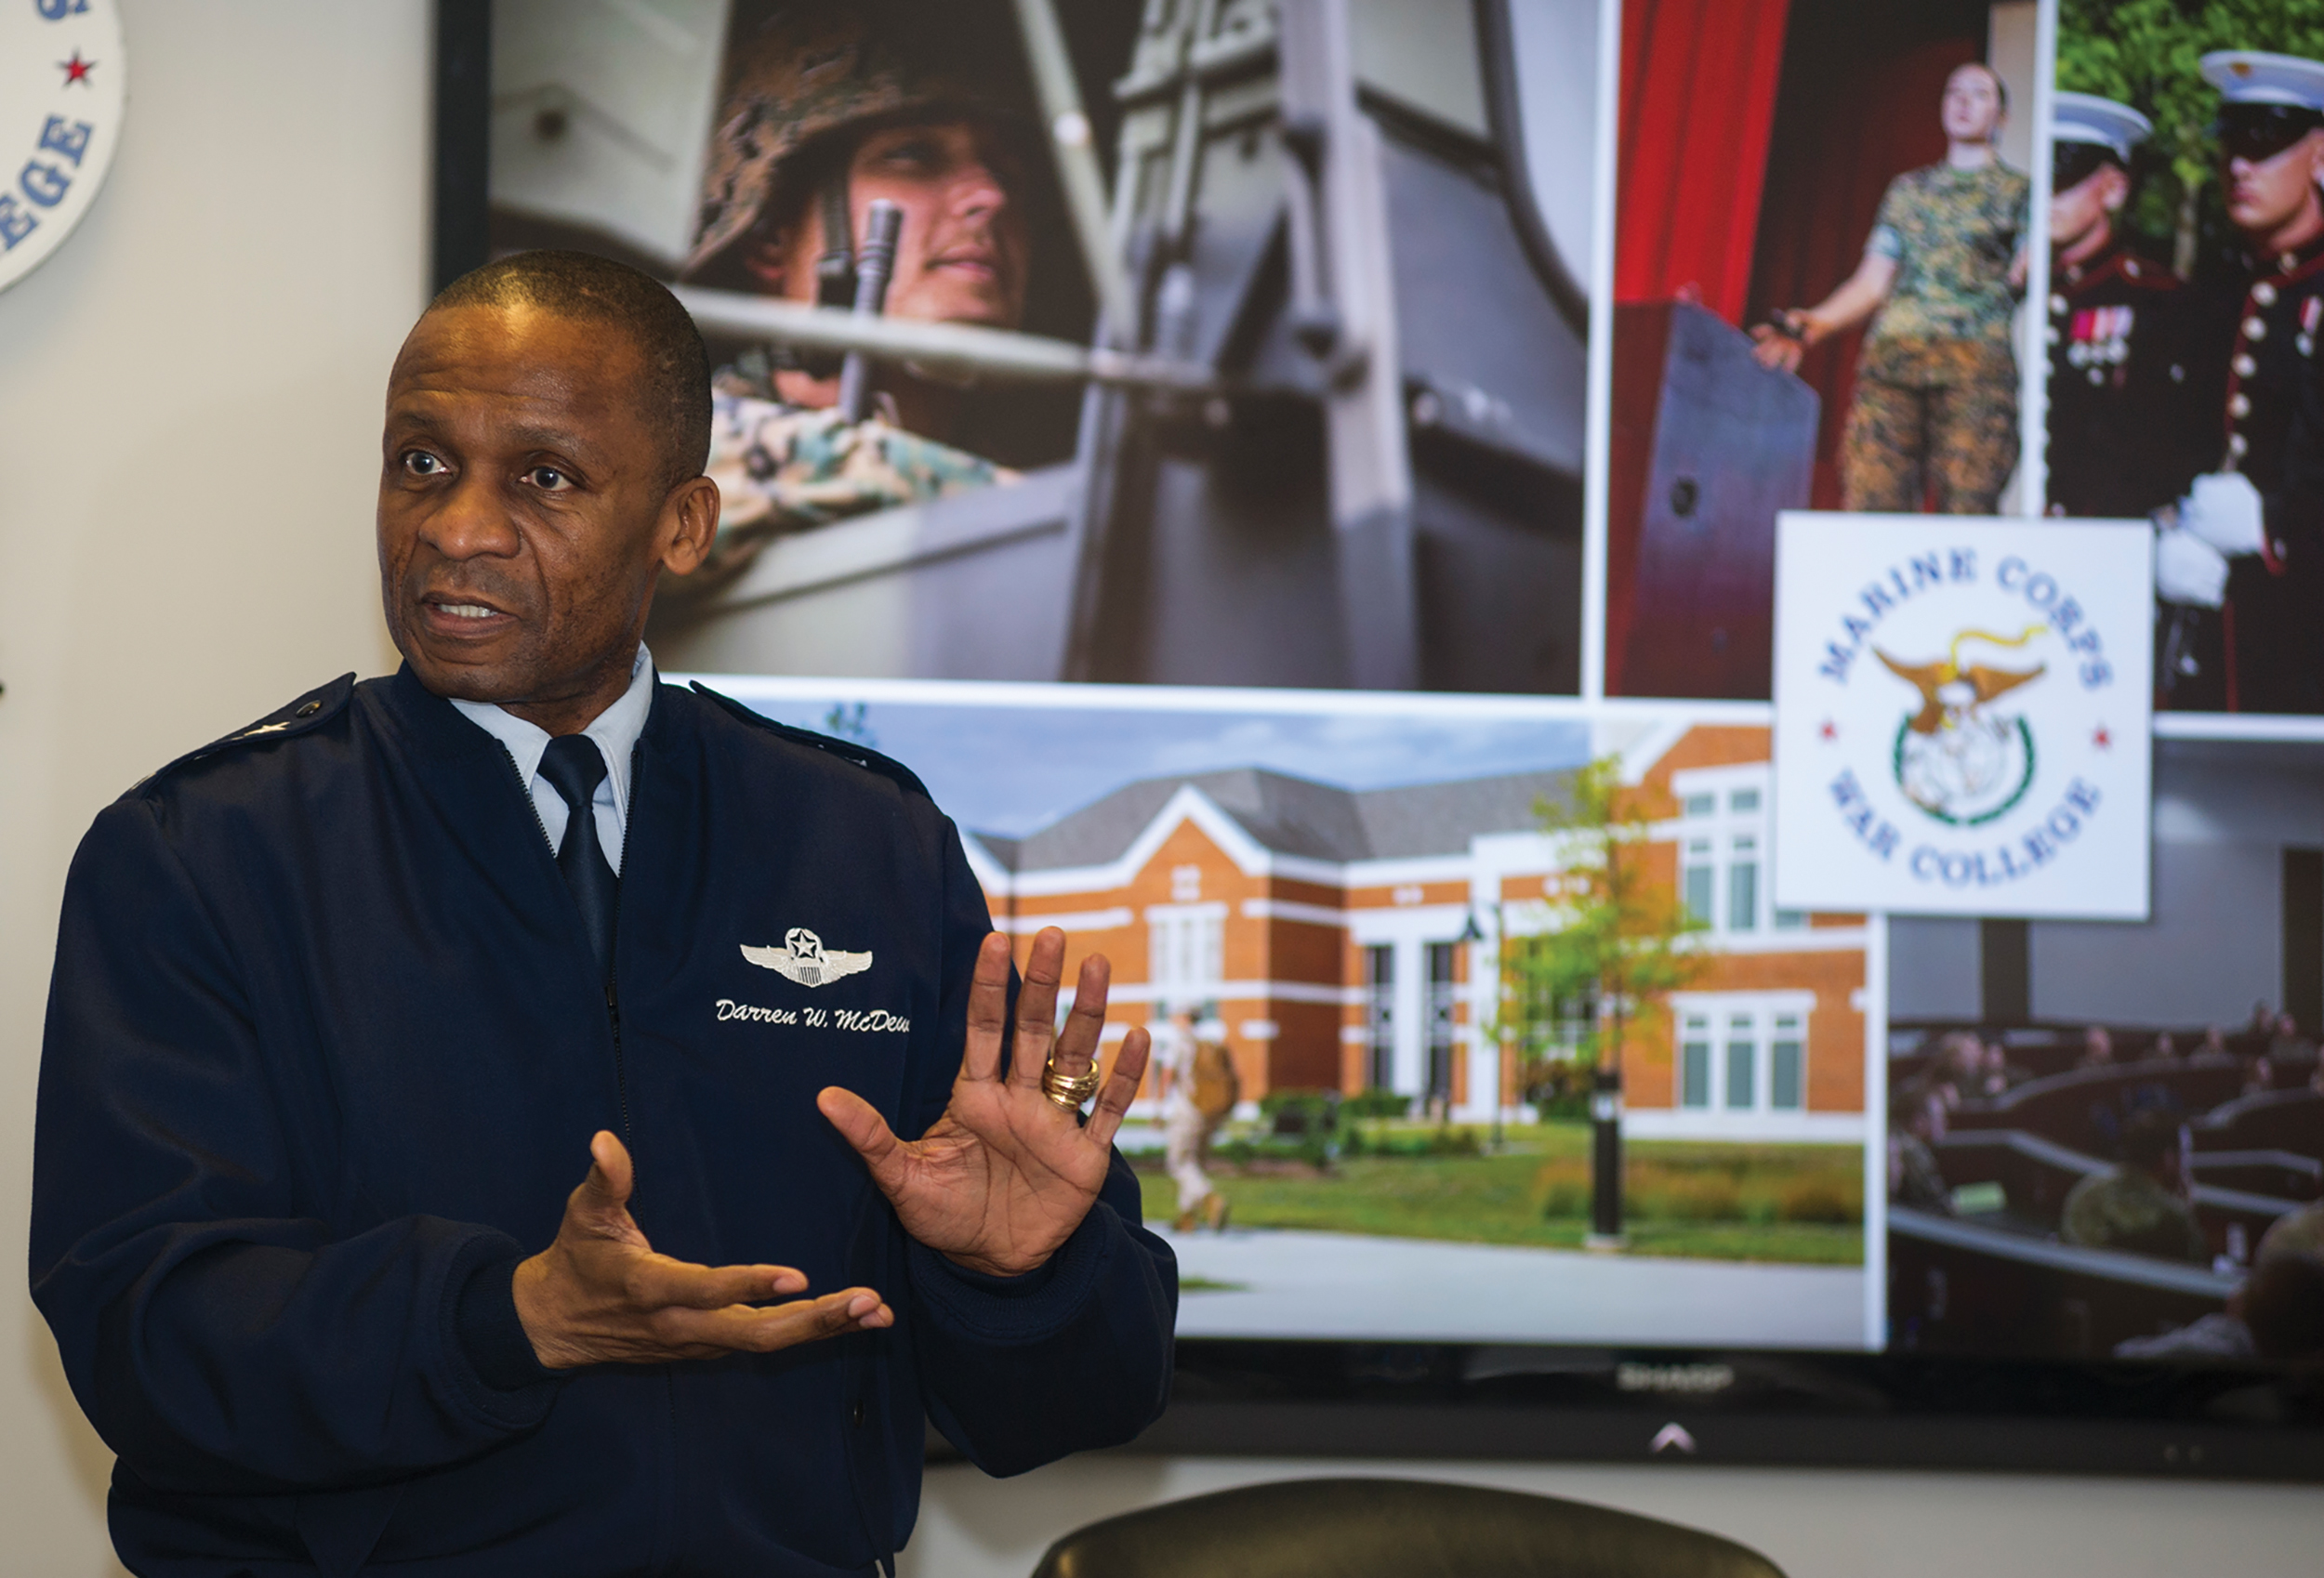 General Darren W. McDew, then commander of U.S. Transportation Command, Scott Air Force Base, Illinois, presents lecture to Marine Corps War College students at Dunlap Hall, Marine Corps University, Quantico, Virginia